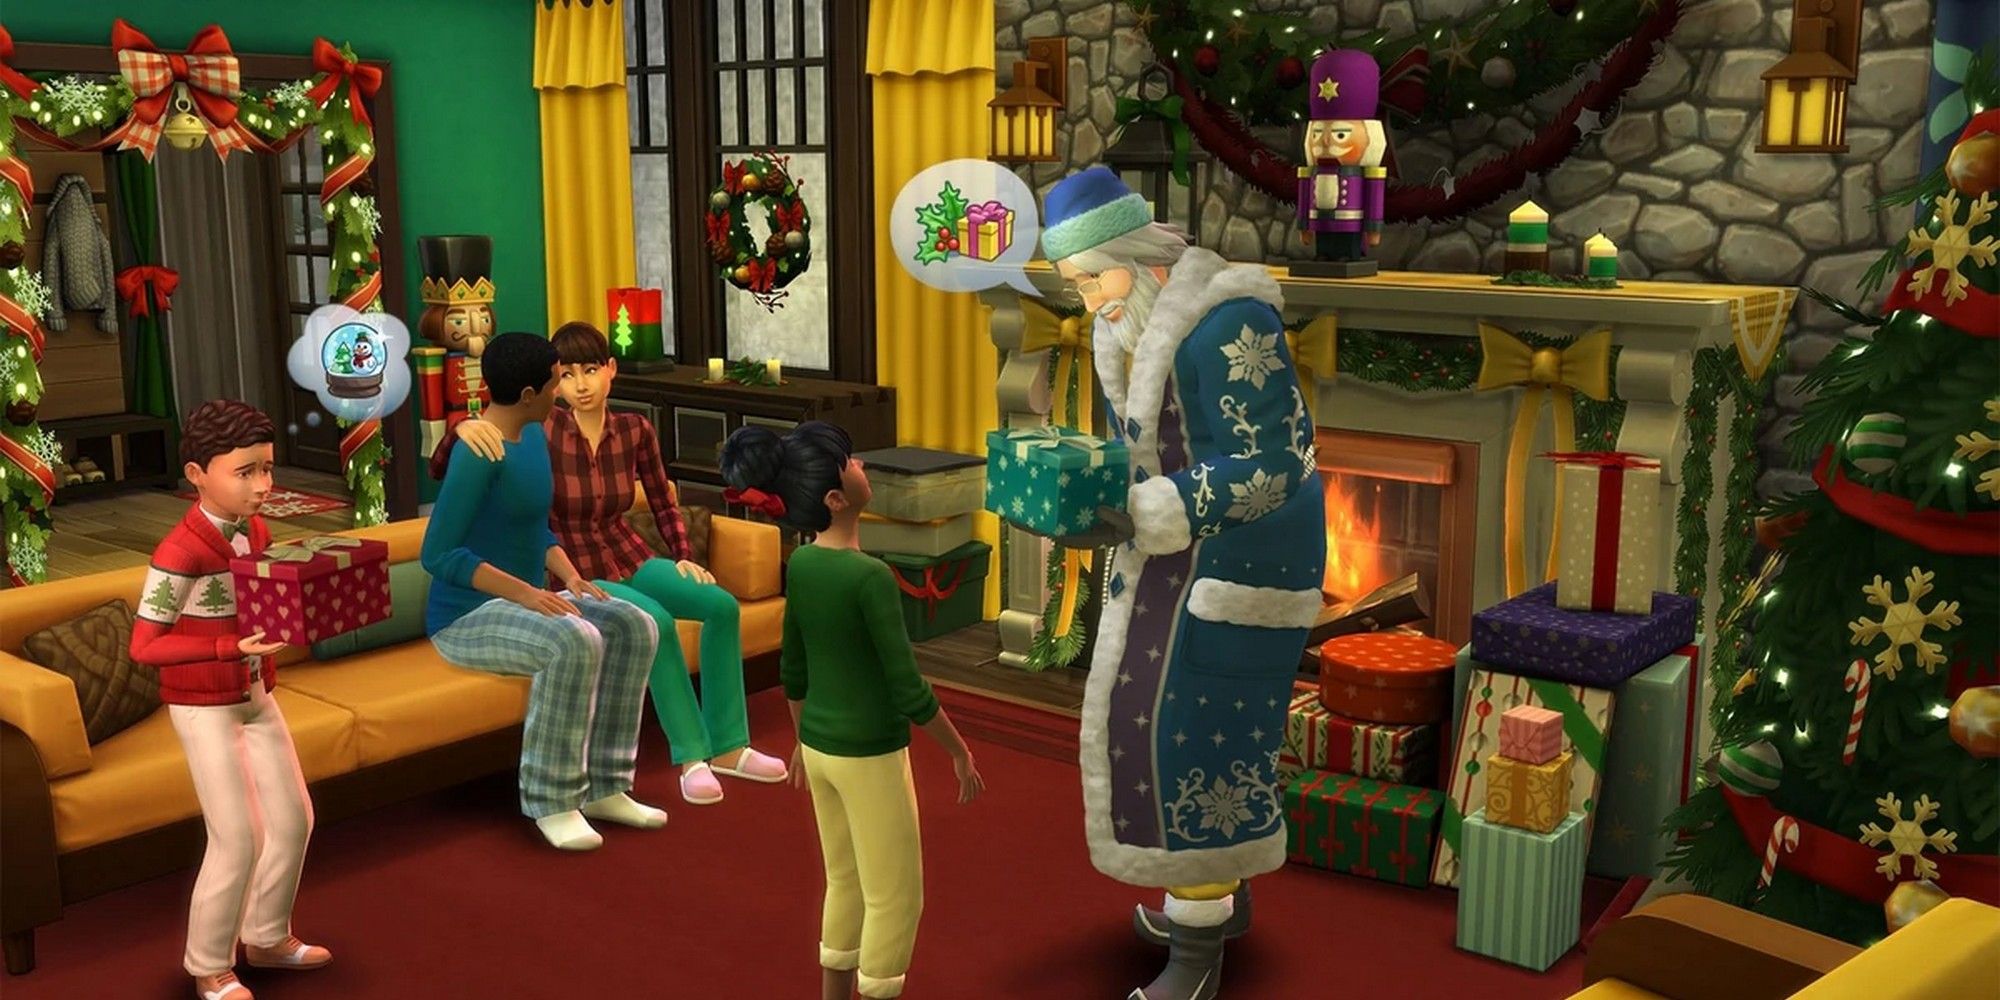 What Do Each Of The Gnomes Want In The Sims 4 Seasons?